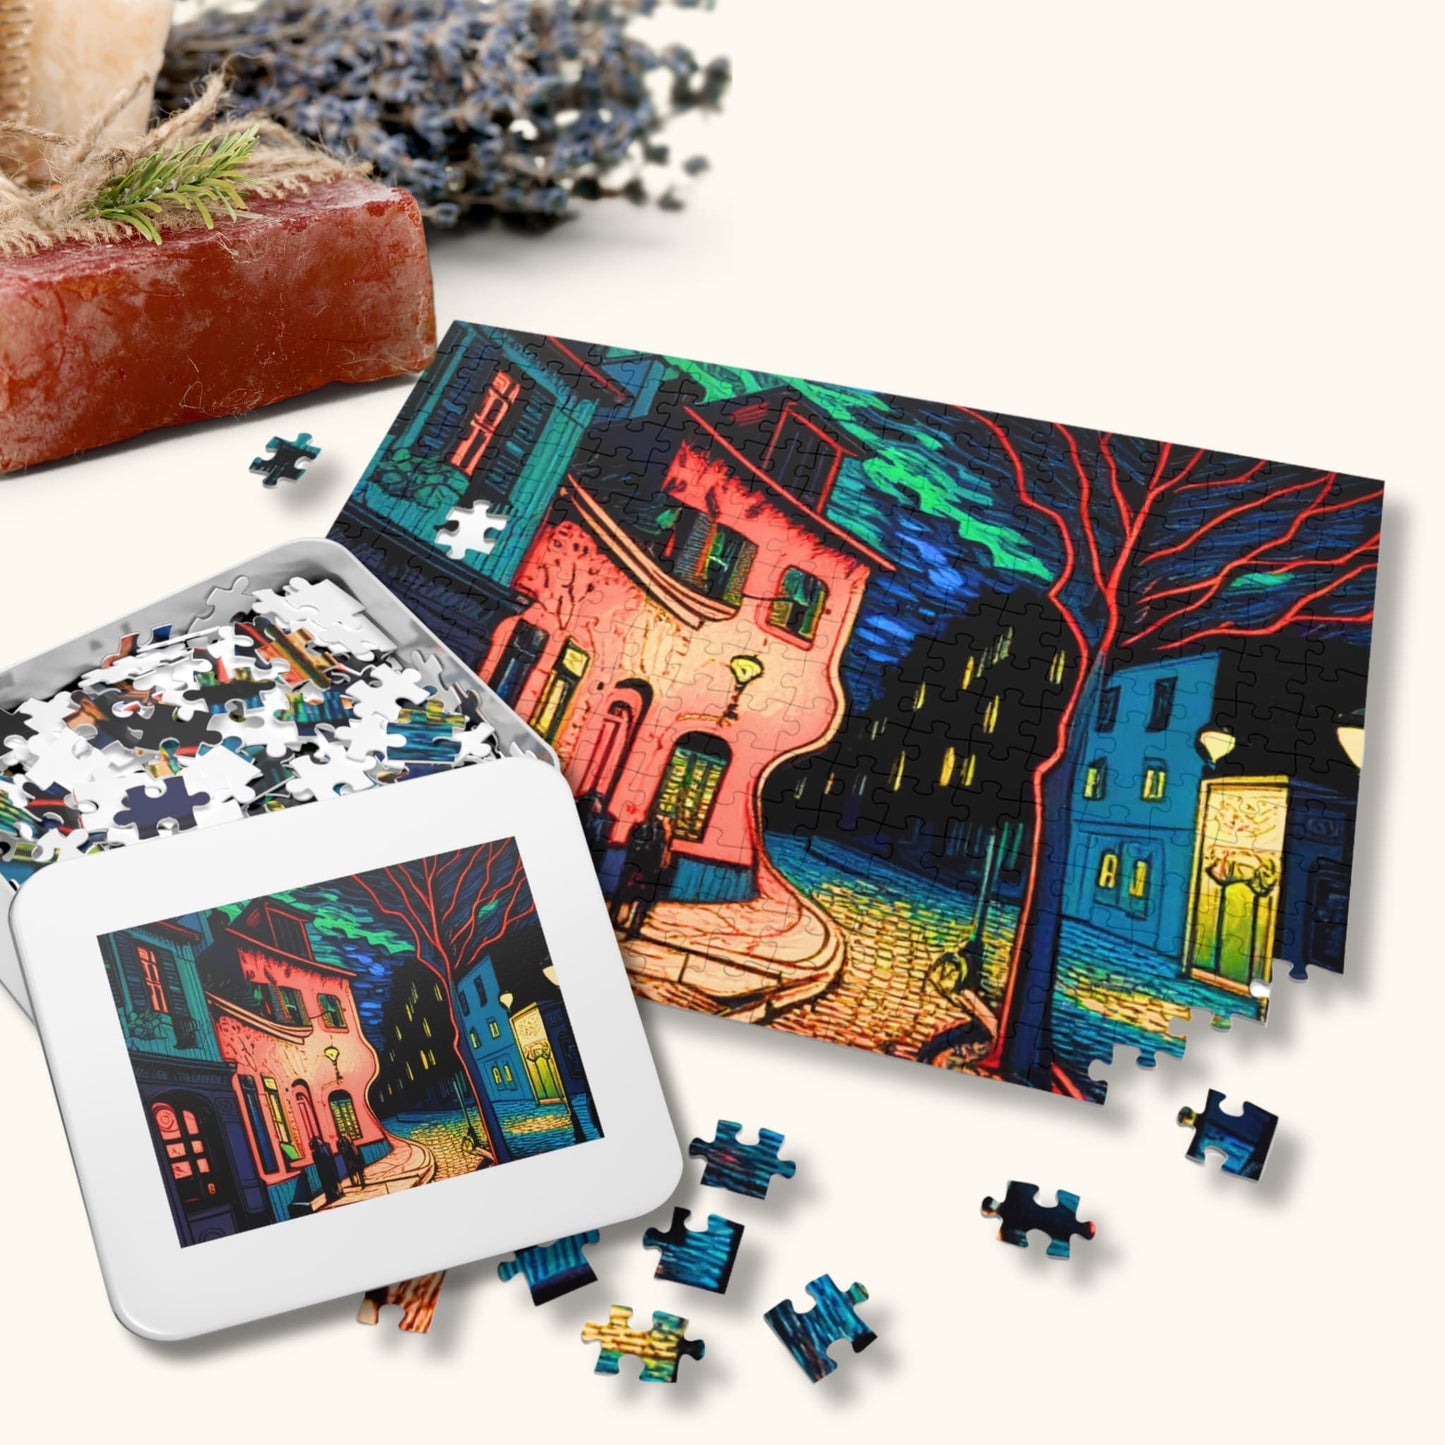 The 500-piece Vincent Van Gogh Starry Night Inspired Cityscape Puzzle next to its packaging, perfect for gifting.